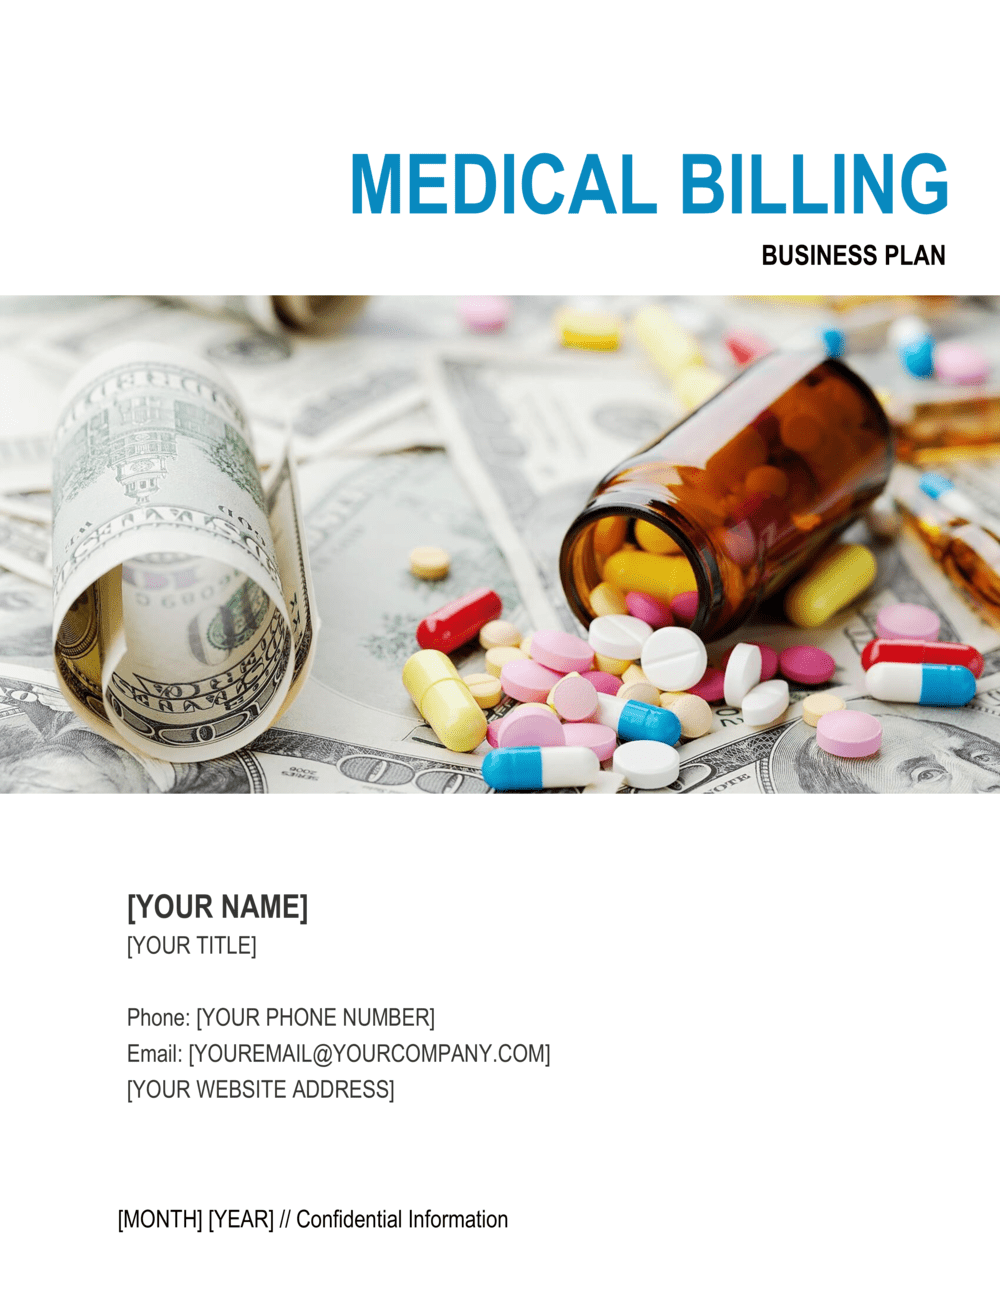 medical billing business plan template by business in a box